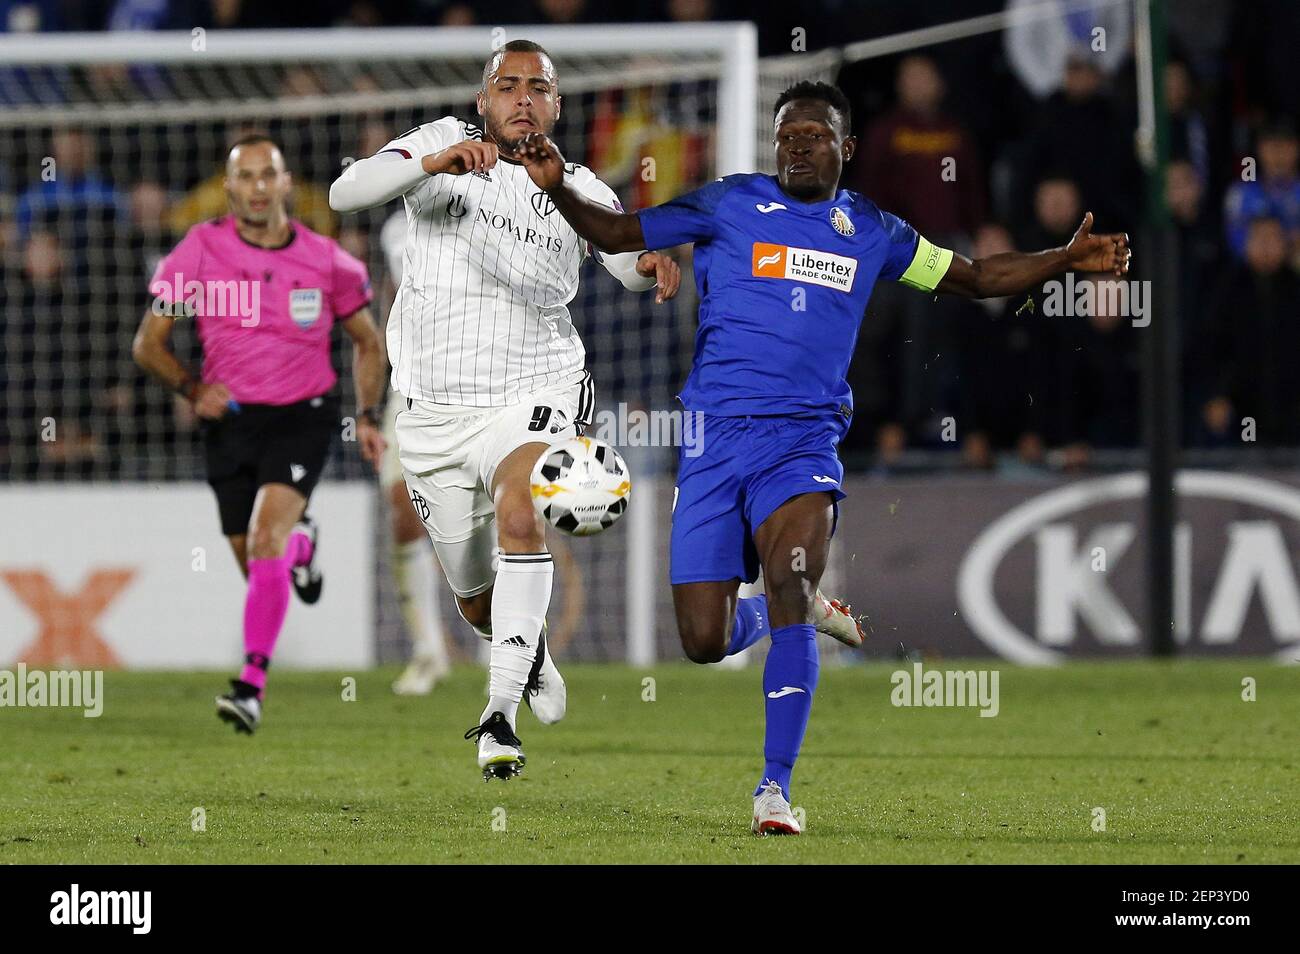 Getafe Cf S Djene Dakonam And Fc Basel S Arthur Cabral Are Seen In Action During The Uefa Europa League Match Between Getafe Cf And Fc Basel At The Coliseum Alfonso Perez In Madrid